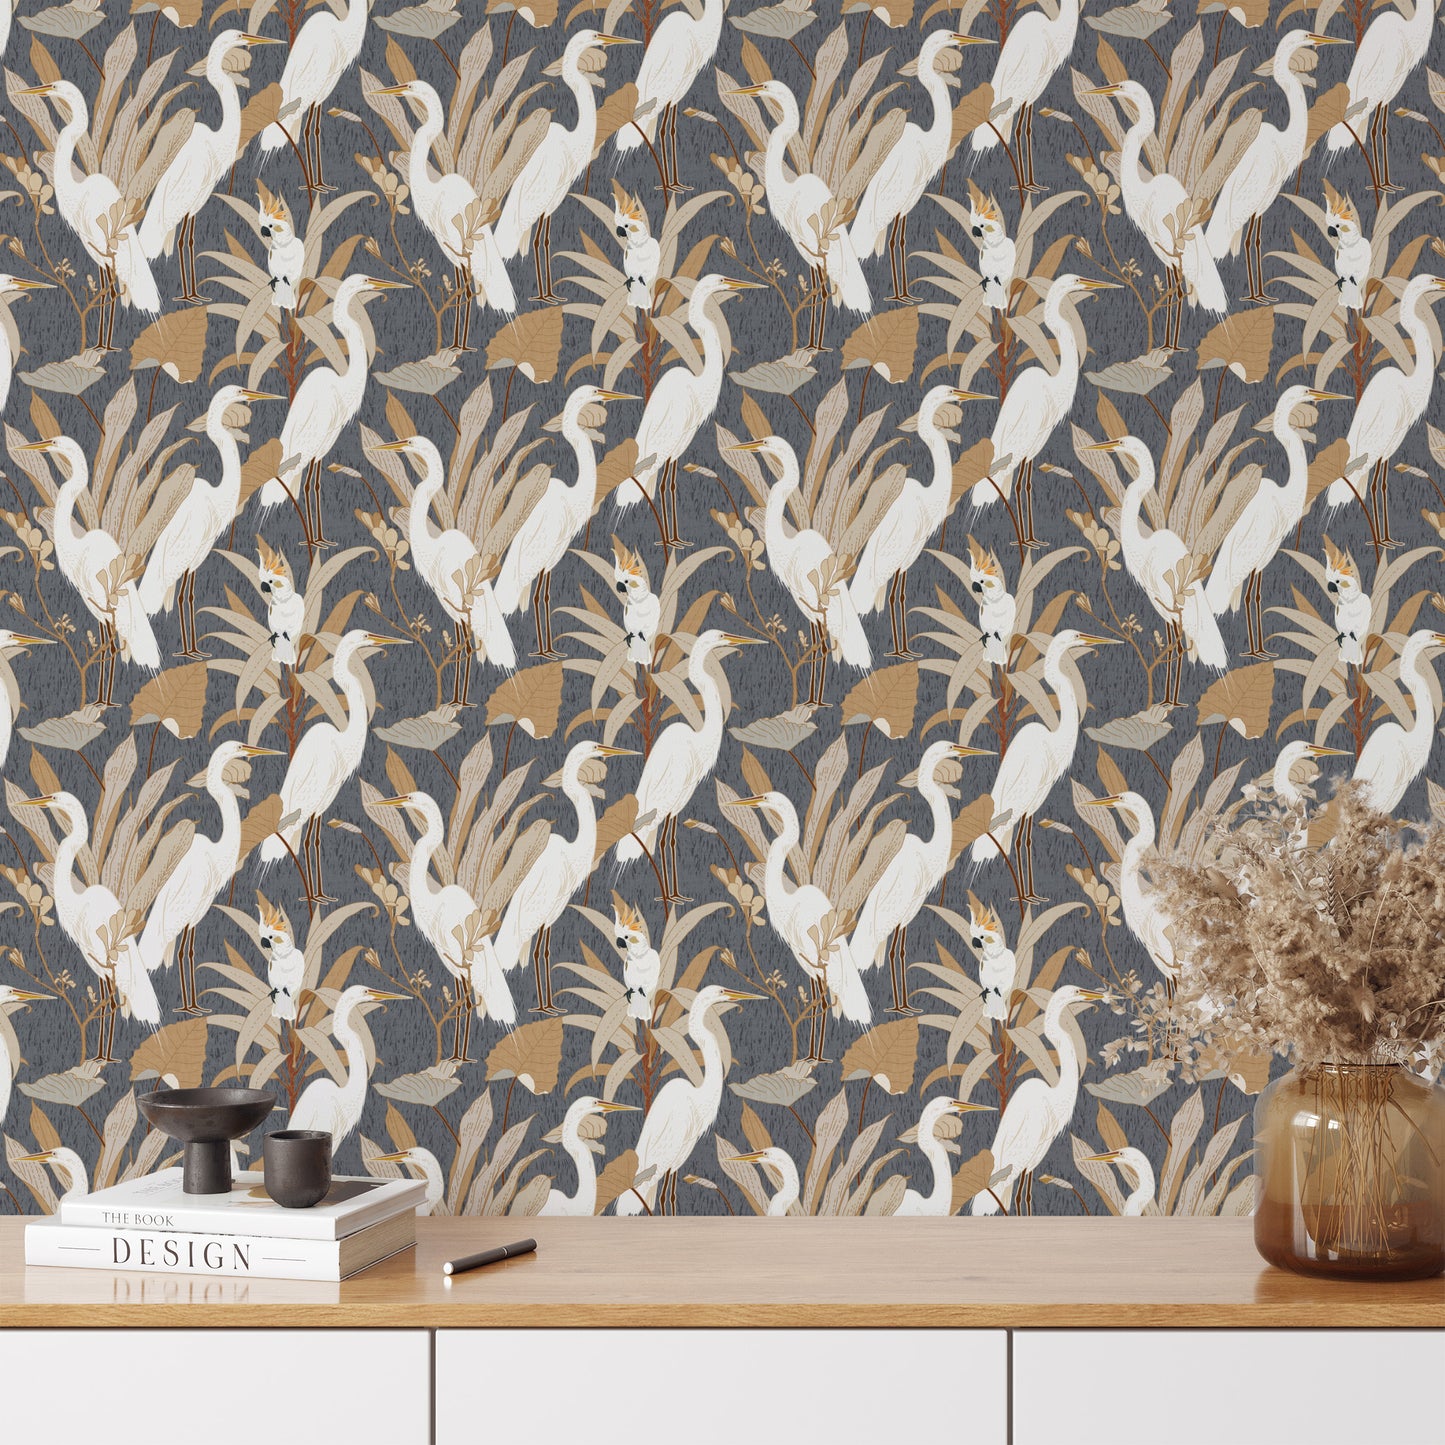 Designed with an eye-catching flair of animals and class, Cranes and Cockatoo Wallpaper - Denim Blue encaptures tasteful luxury. This exclusive wallpaper features a sophisticated design of cranes and cockatoos, perfect for bringing a sense of refinement and elegance to your home.